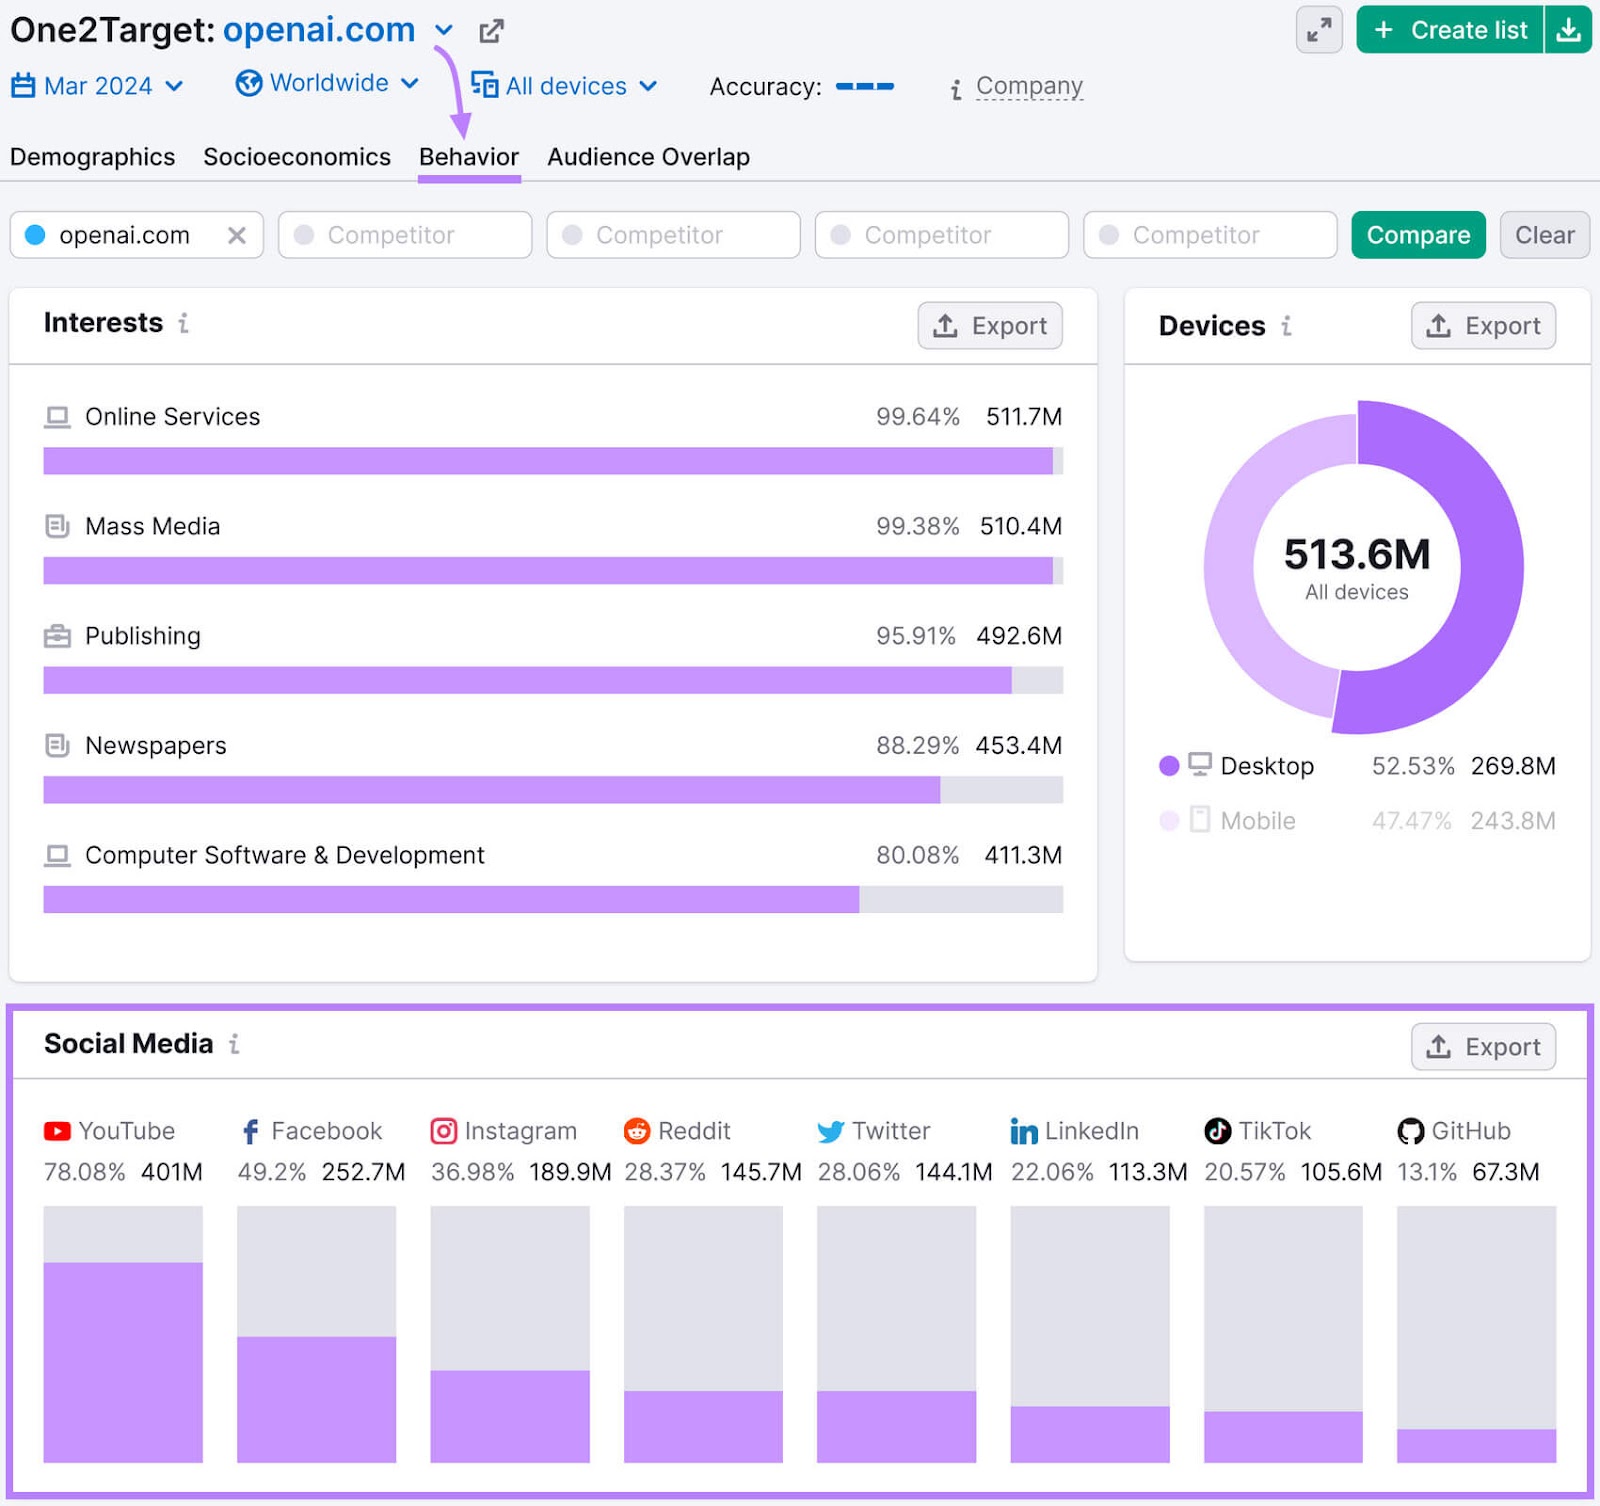 One2Target "Behavior" dashboard, with a focus on the "Social Media" panel, highlighted with a purple box.